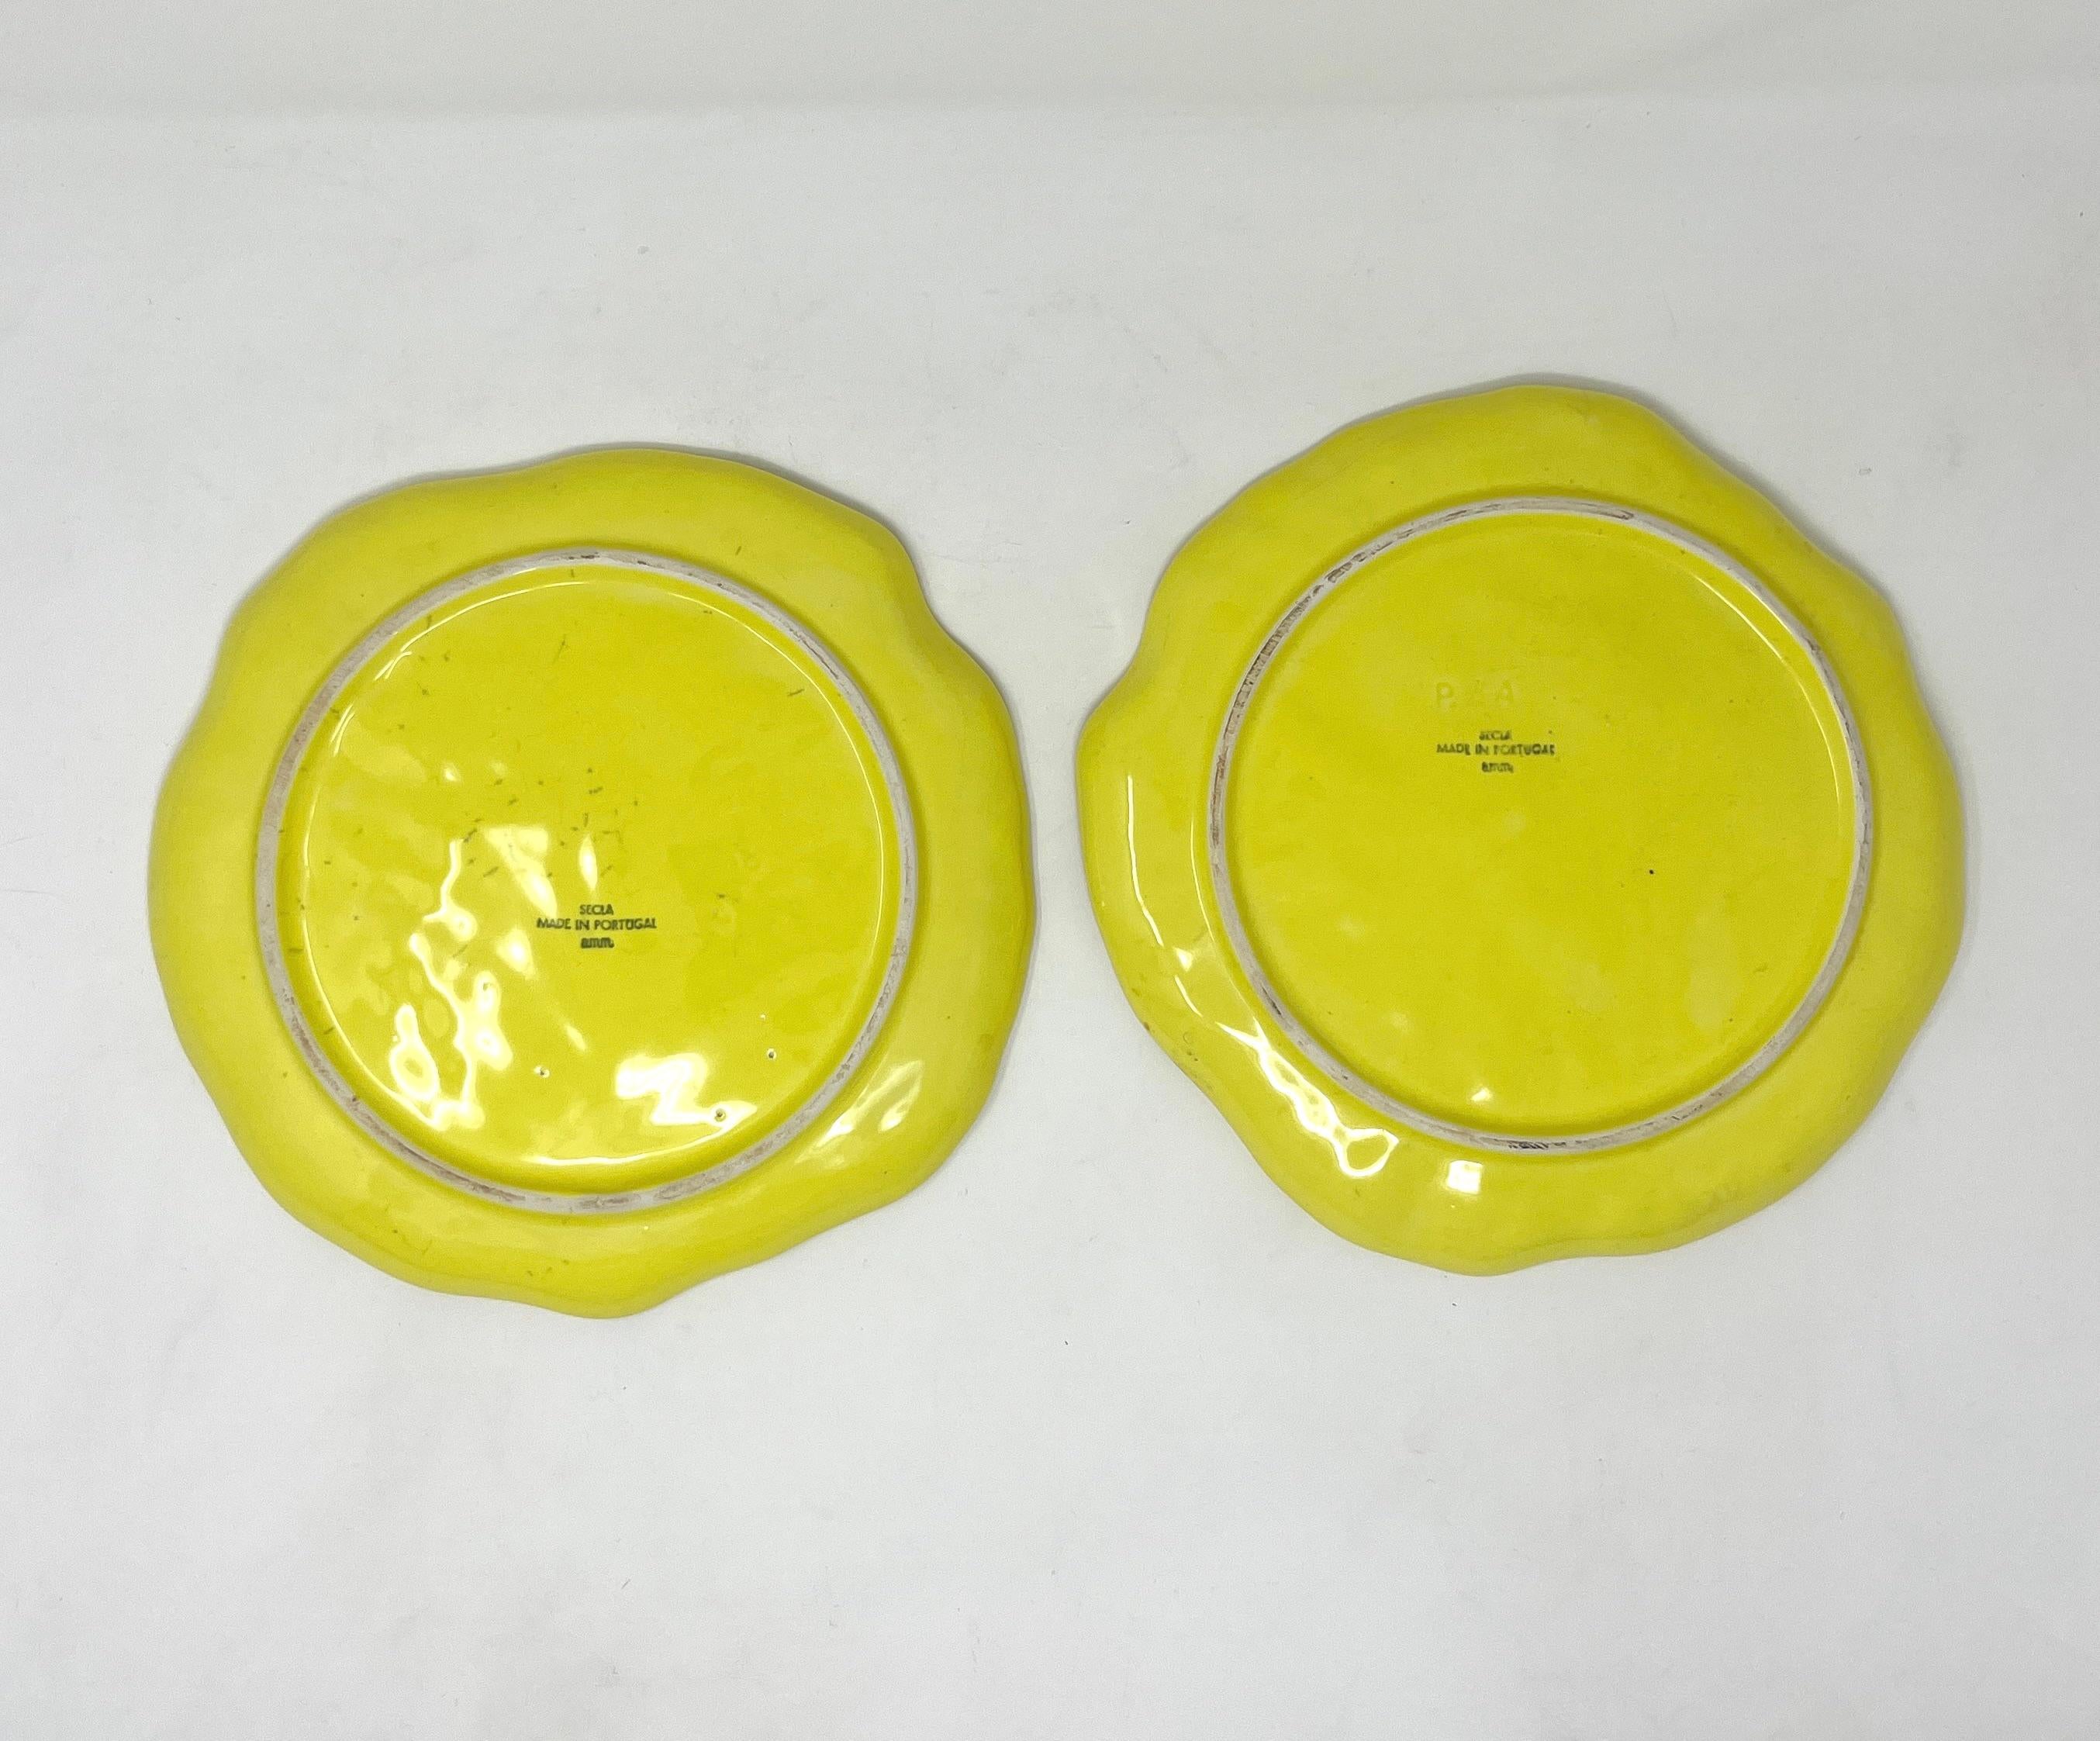 American Classical Vintage Portuguese Secla Majolica Lettuce Leaf Lunch Plates, Pair, Lemon Yellow For Sale